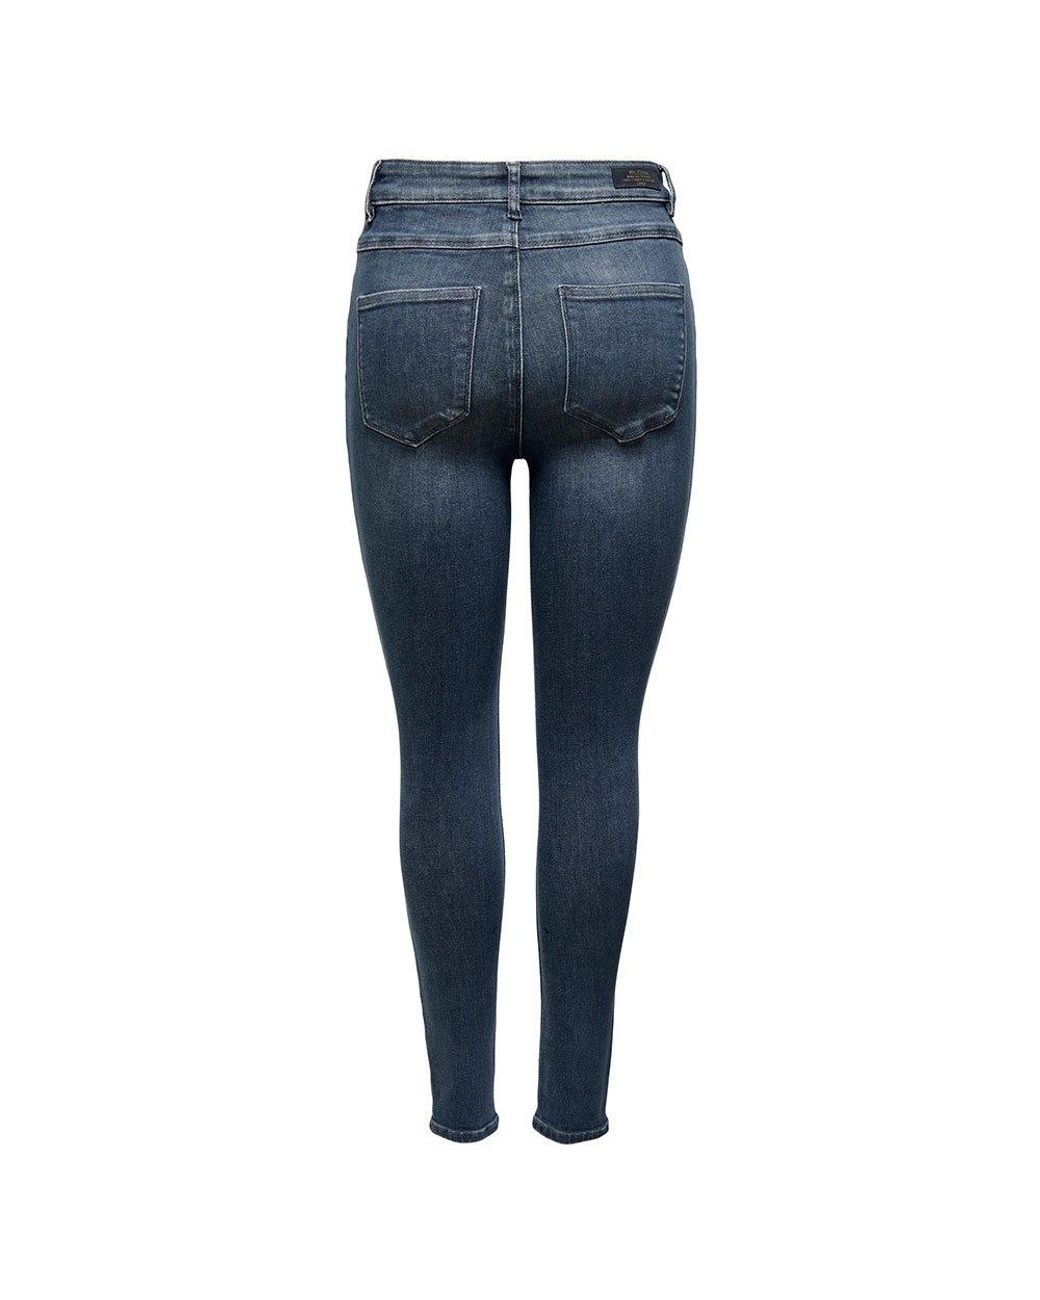 ONLY Mila Skinny Fit Bj407 High Waist Jeans in Blue | Lyst